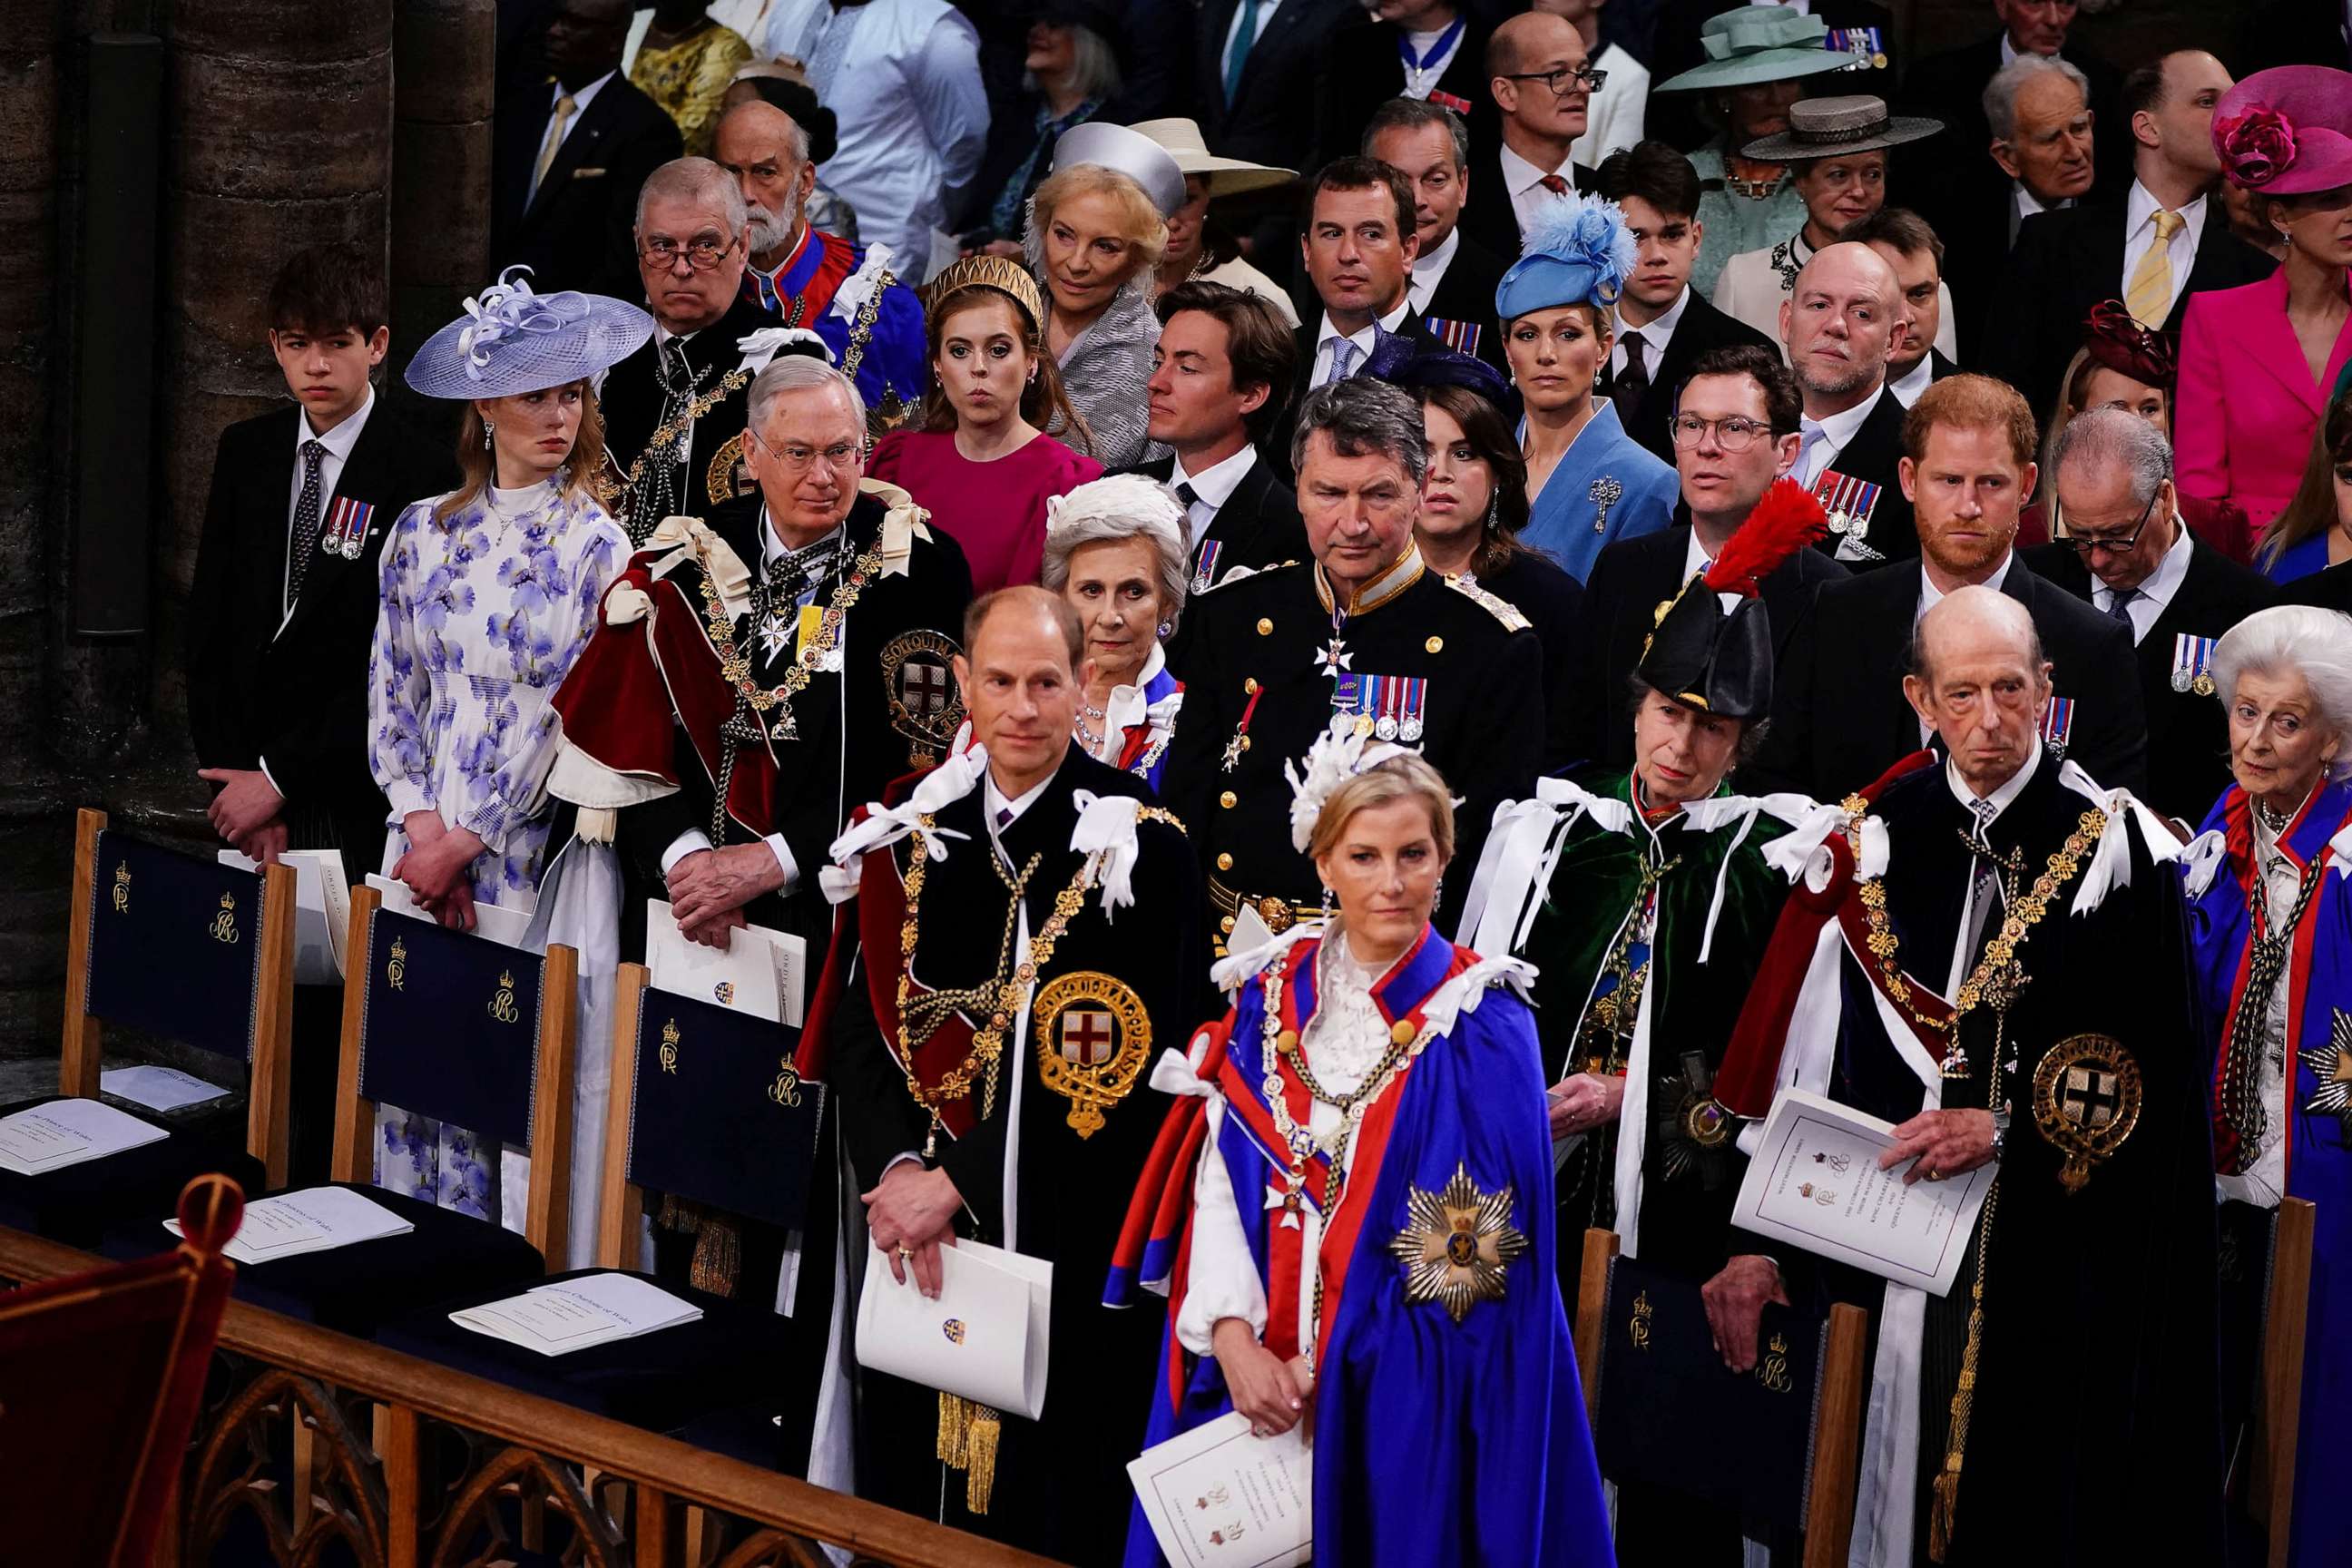 PHOTO: The Duke of York, Princess Beatrice, Peter Phillips, Edoardo Mapelli Mozzi, Zara Tindall, Princess Eugenie, Jack Brooksbank, Mike Tindall and the Duke of Sussex, (left to right 2nd row) the Earl of Wessex,